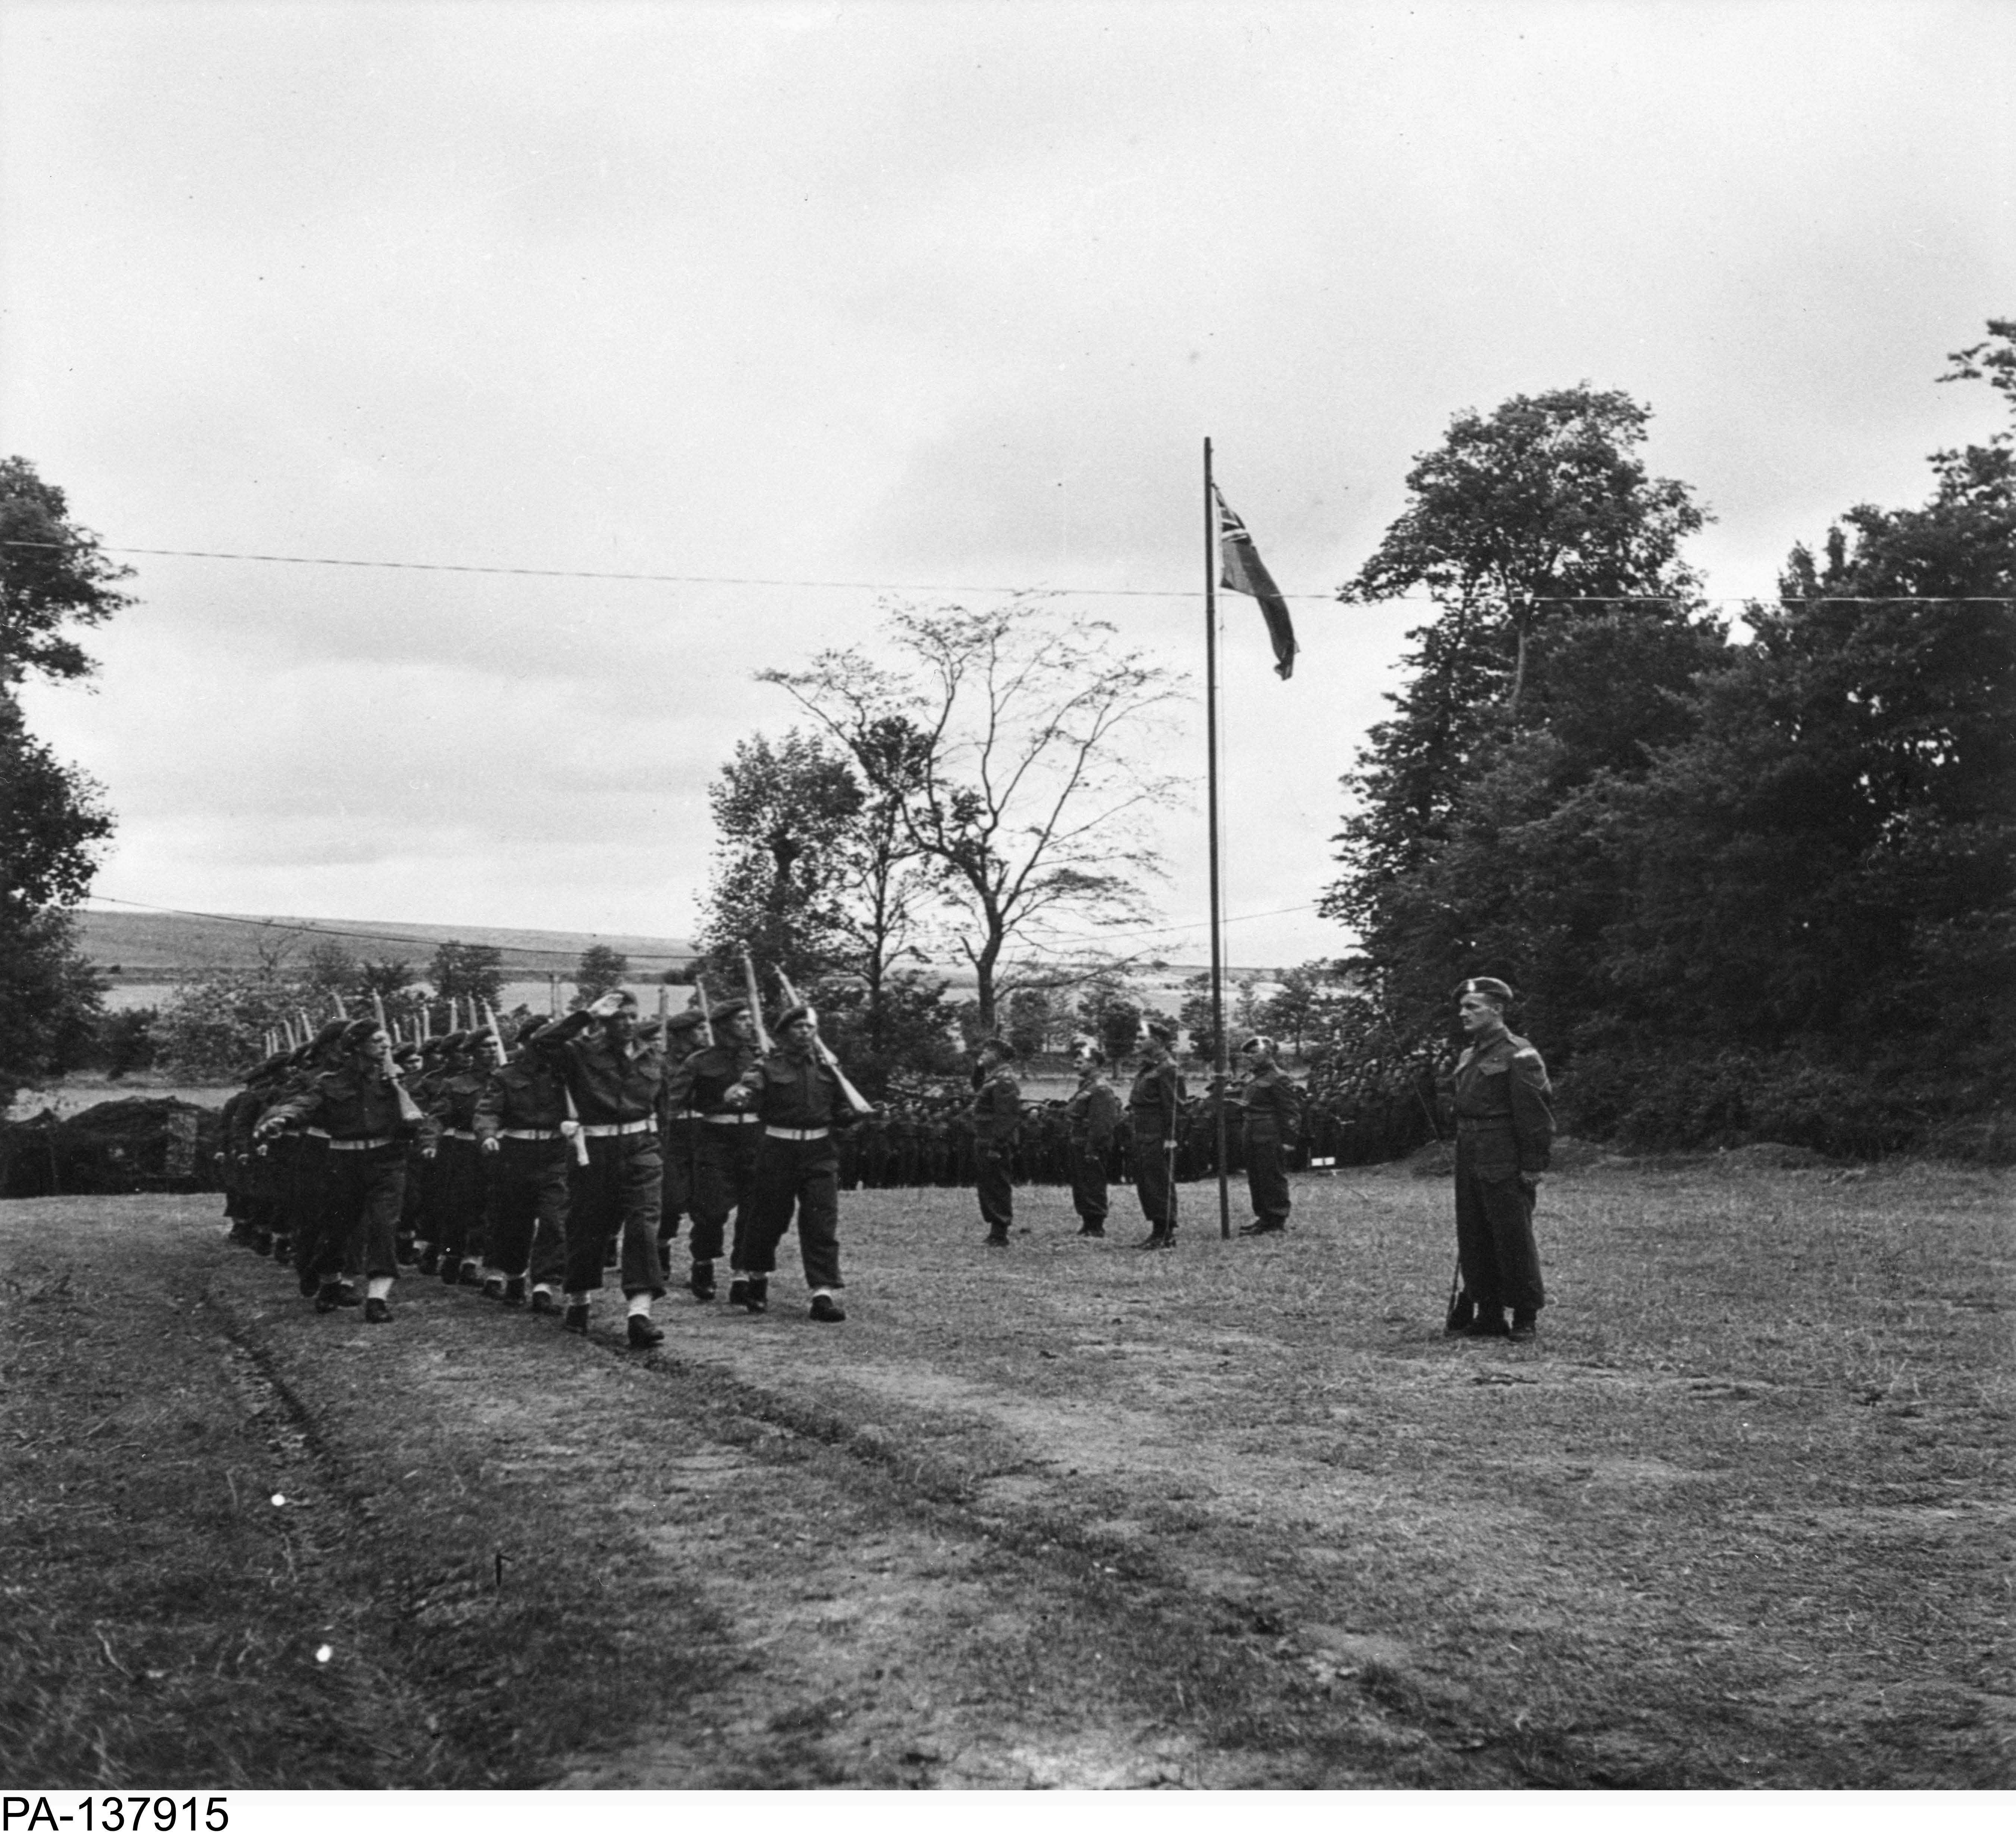 Black and white photograph. Three rows of soldiers march past a raised red ensign and superior officers. All men salute. They are outside, marching across a grassy field surrounded by trees.